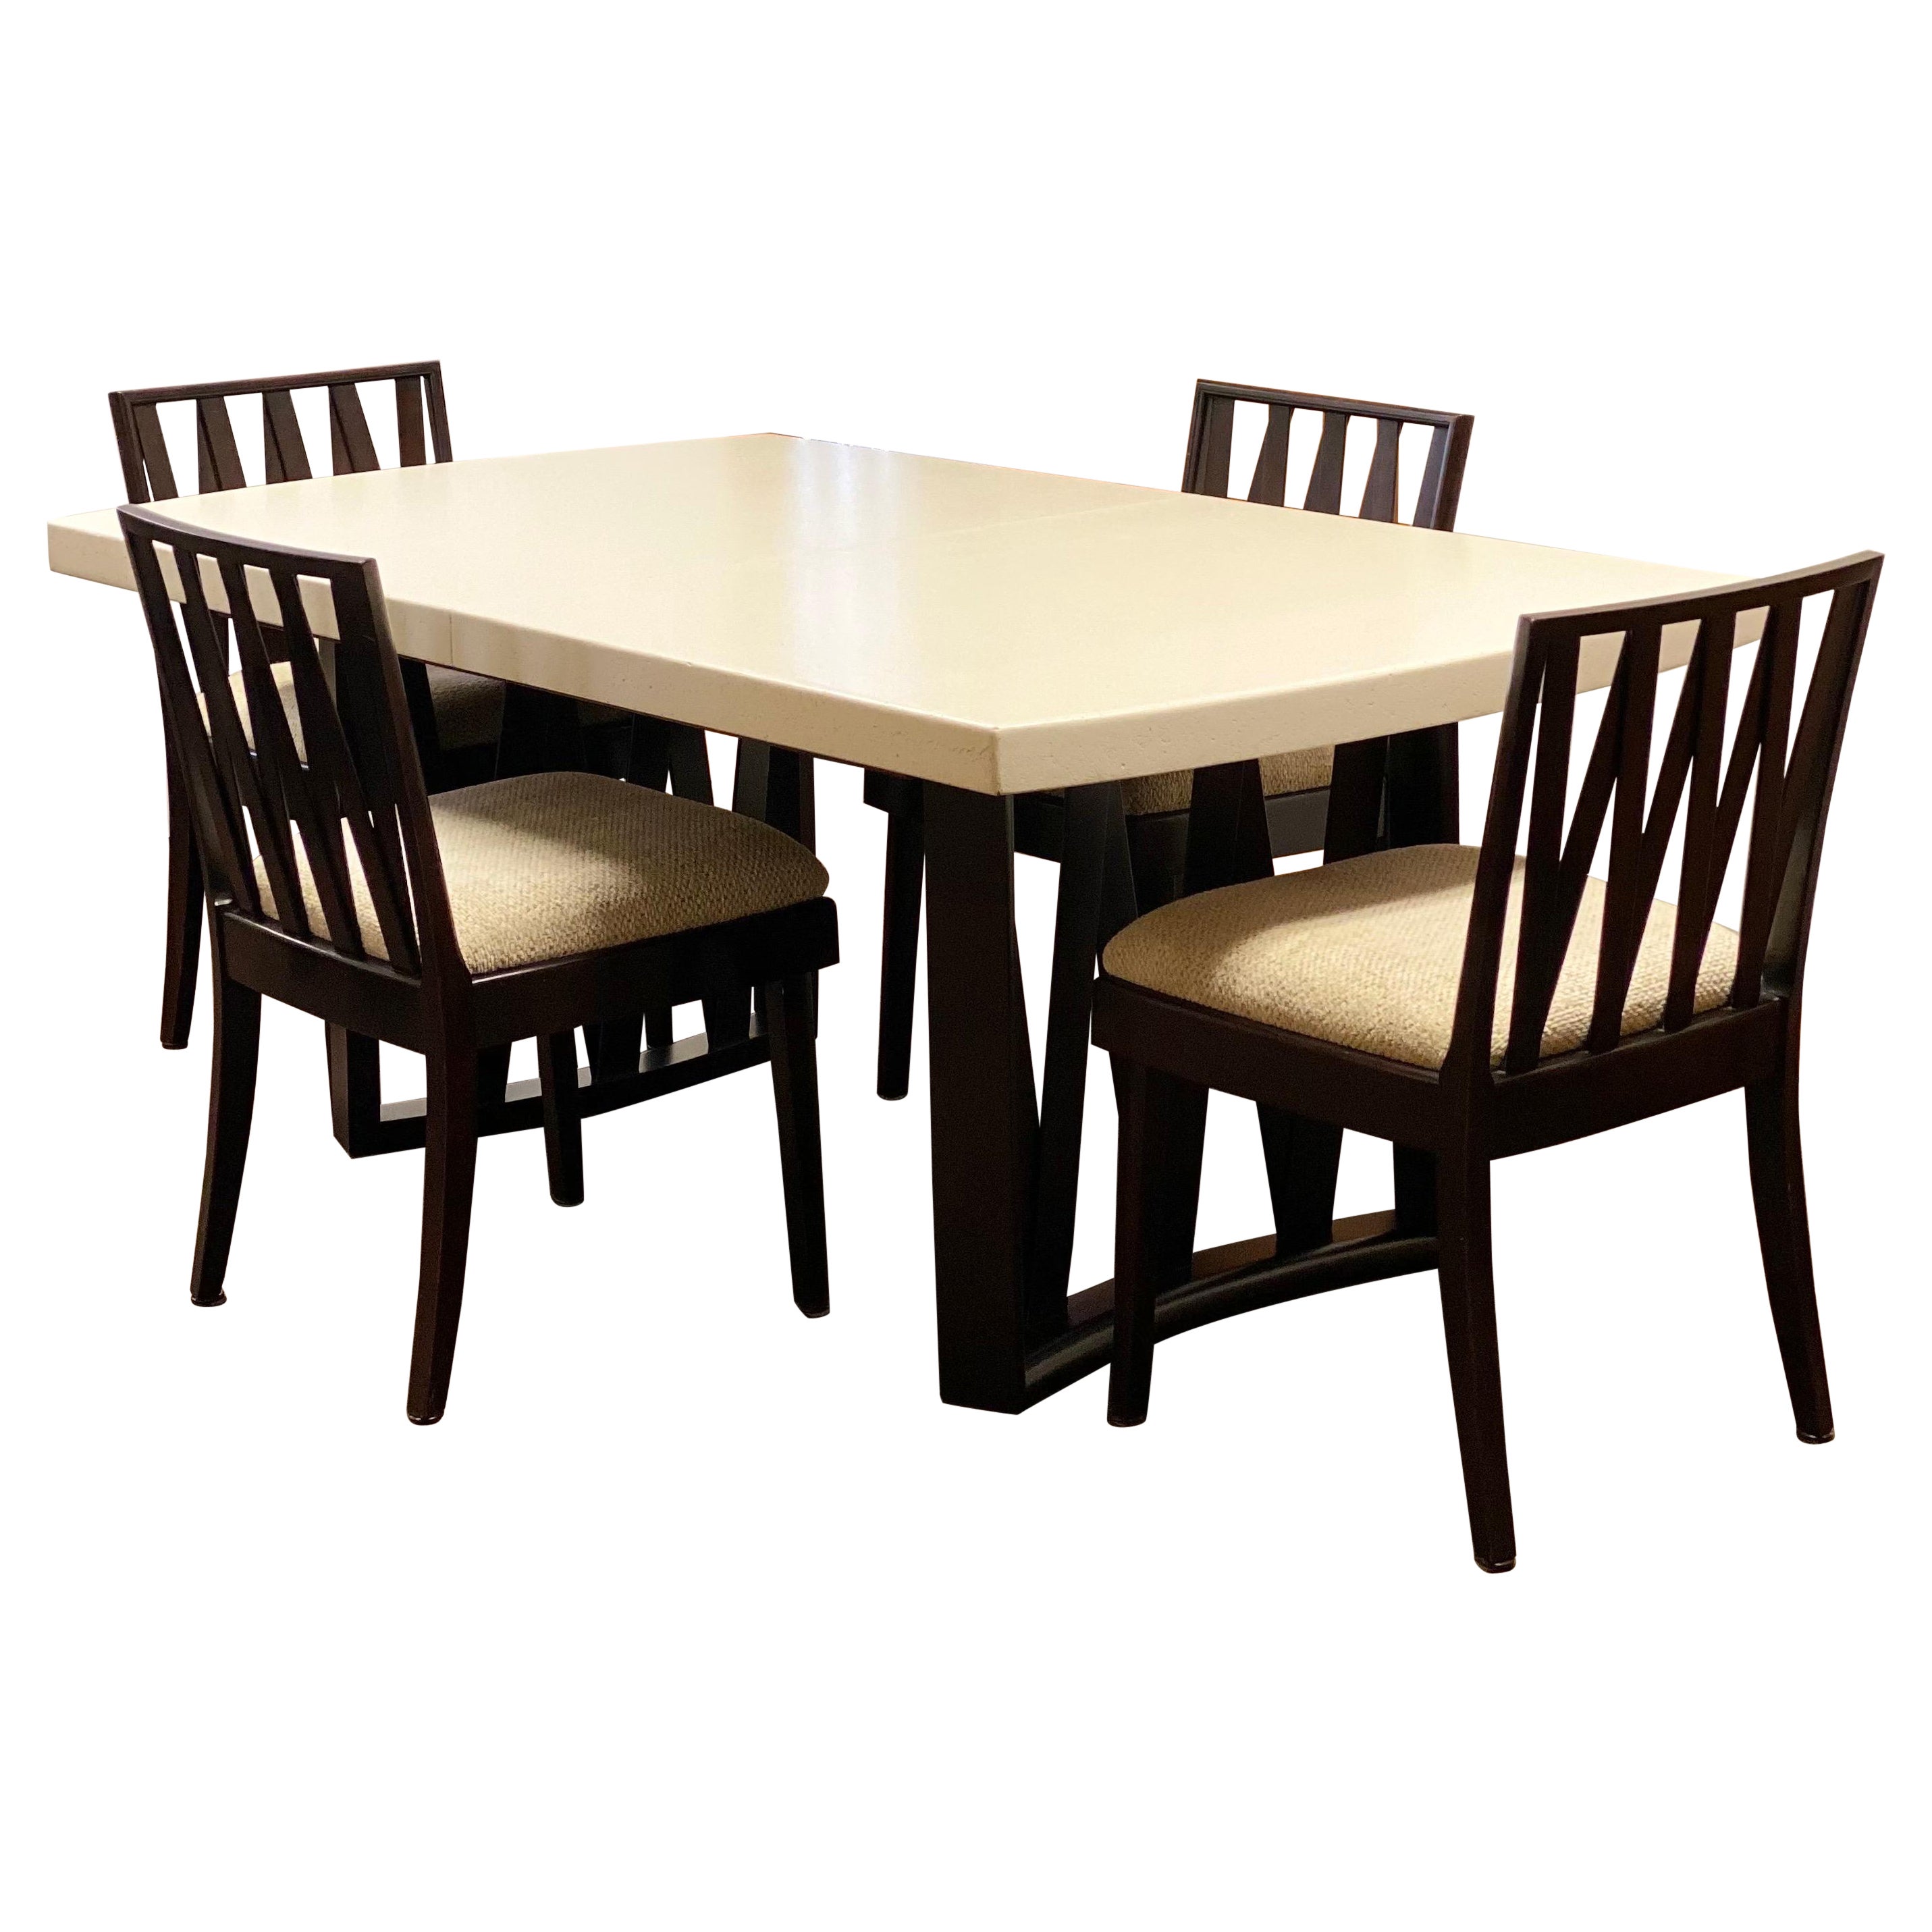 Paul Frankl for Johnson Furniture Mahogany and White Cork Dining Set, Set of 5